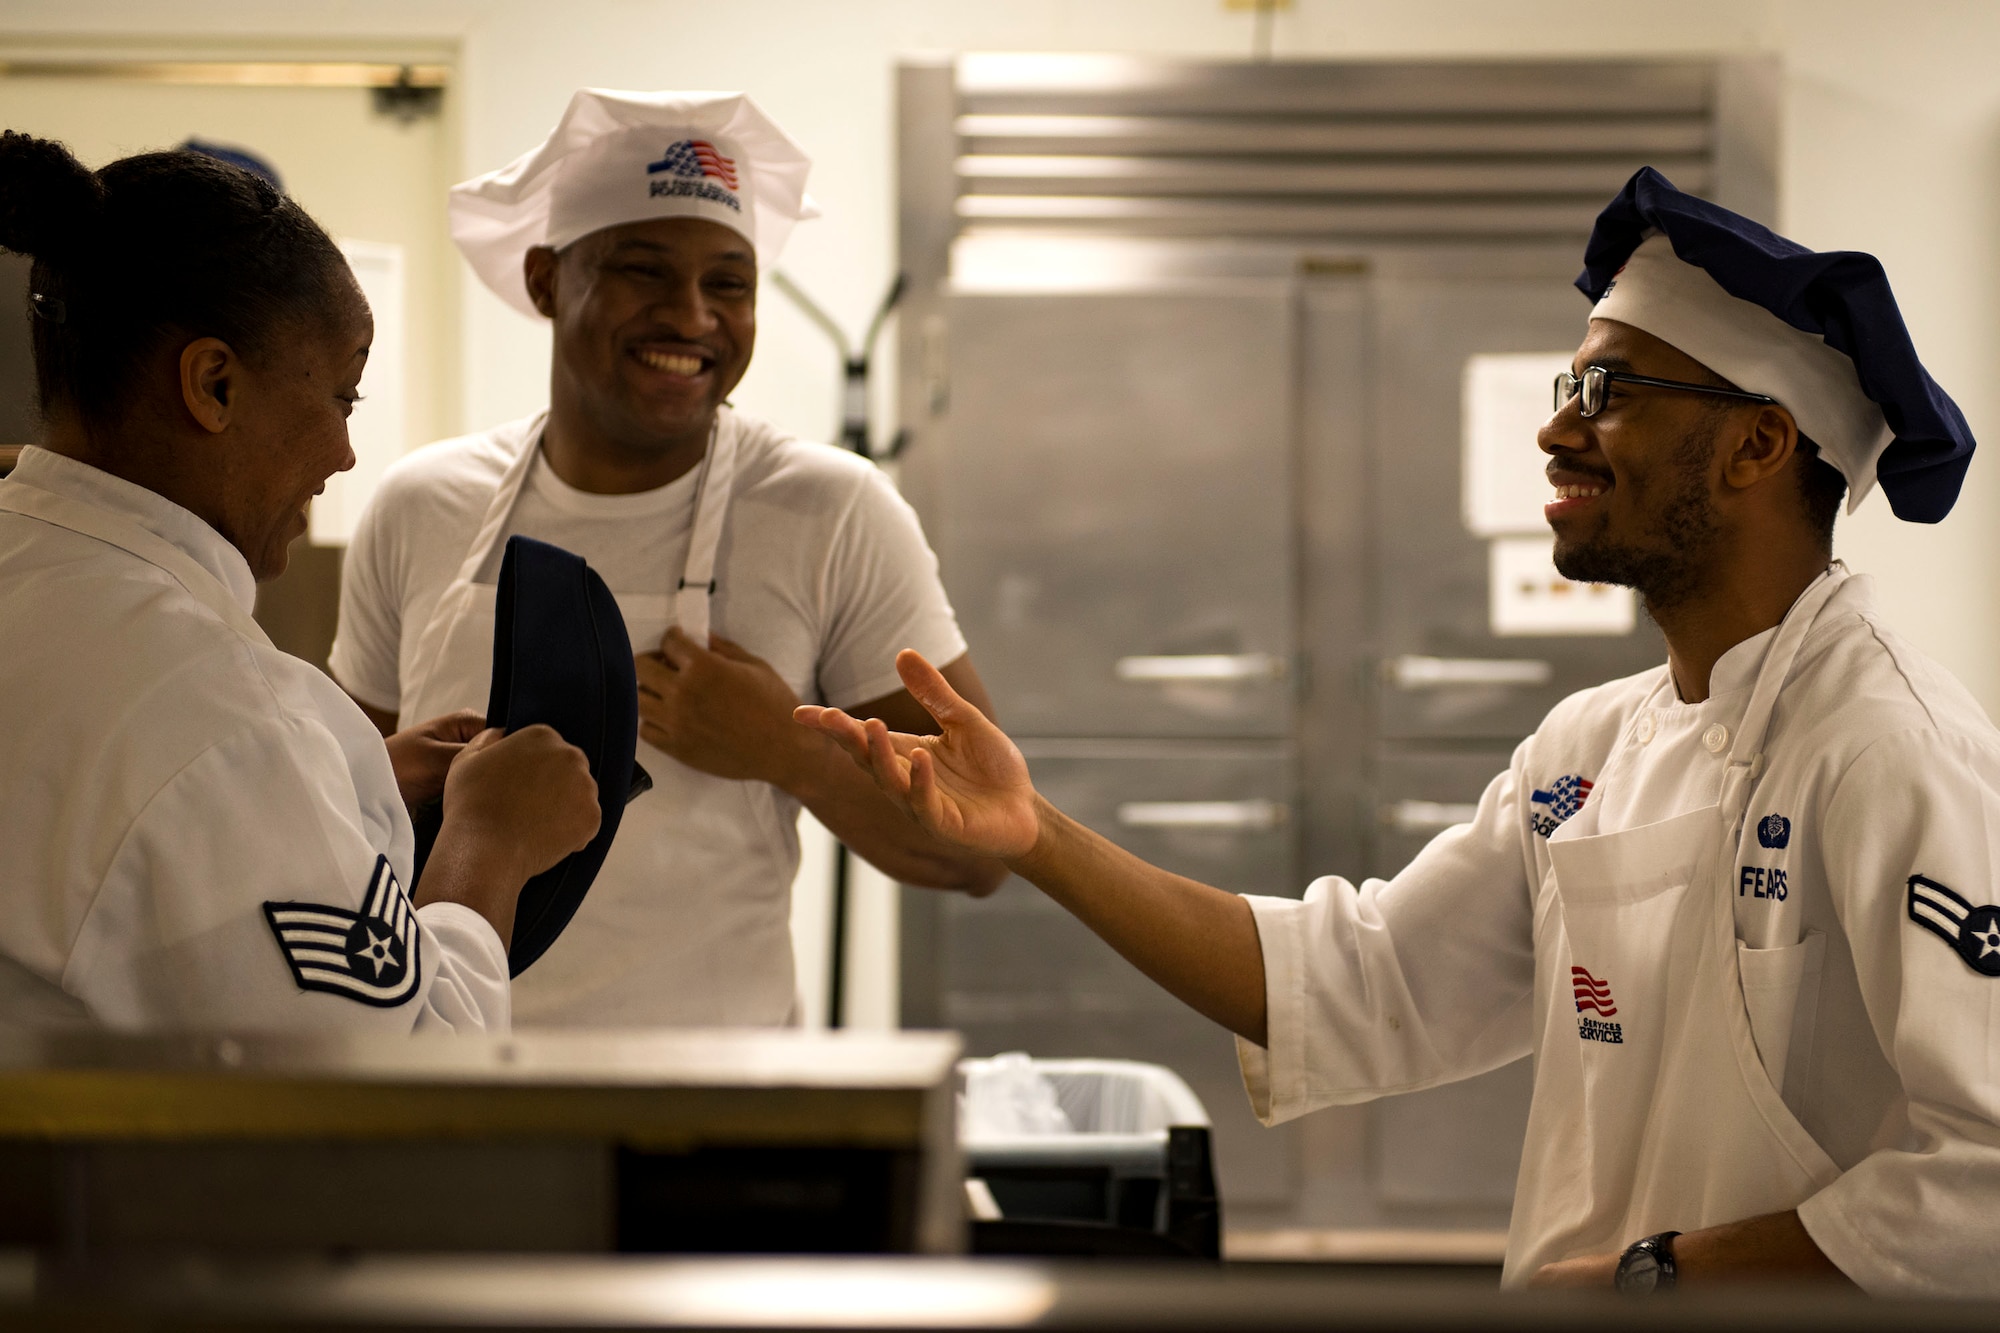 Staff Sgt. Latoya Wells, left, 23d Force Support Squadron (FSS) food services supervisor, Senior Airman Cameron Morrow, middle, 23d FSS food services journeyman, and Airman 1st Class Keven Fears, 23d FSS food services specialist, share a laugh in the Georgia Pines Dining Facility (DFAC), Dec. 12, 2017, at Moody Air Force Base, Ga. Through teamwork, adaption and striving for excellence, the Georgia Pines DFAC Airmen are able to ensure Team Moody is fed and ready to finish the fight. (U.S. Air Force Base photo by Airman 1st Class Erick Requadt)